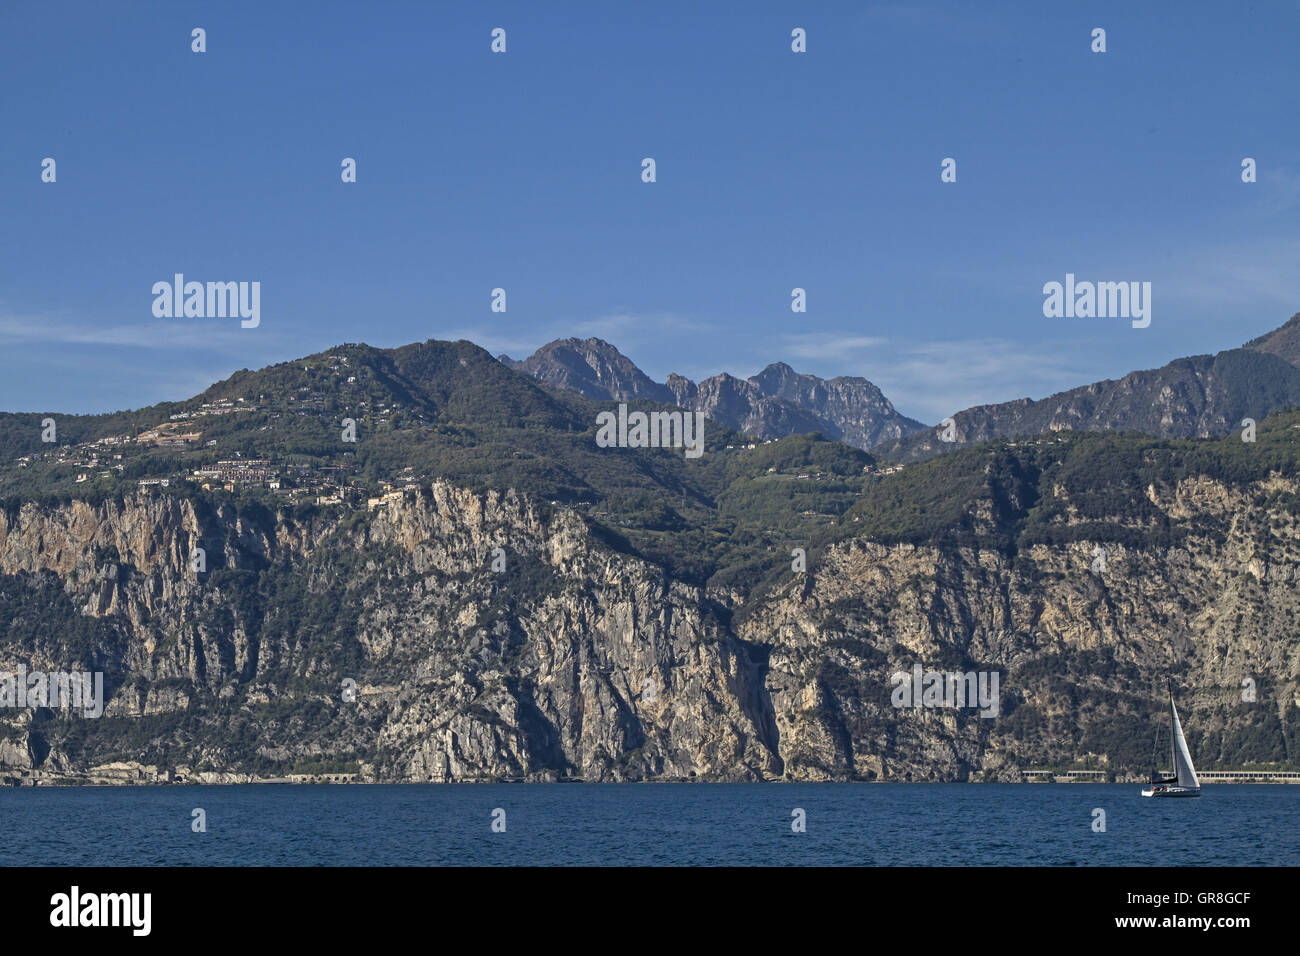 View From Malcesine On The Plateau Of Tremosine And Tignale With Its Many Small Villages Stock Photo